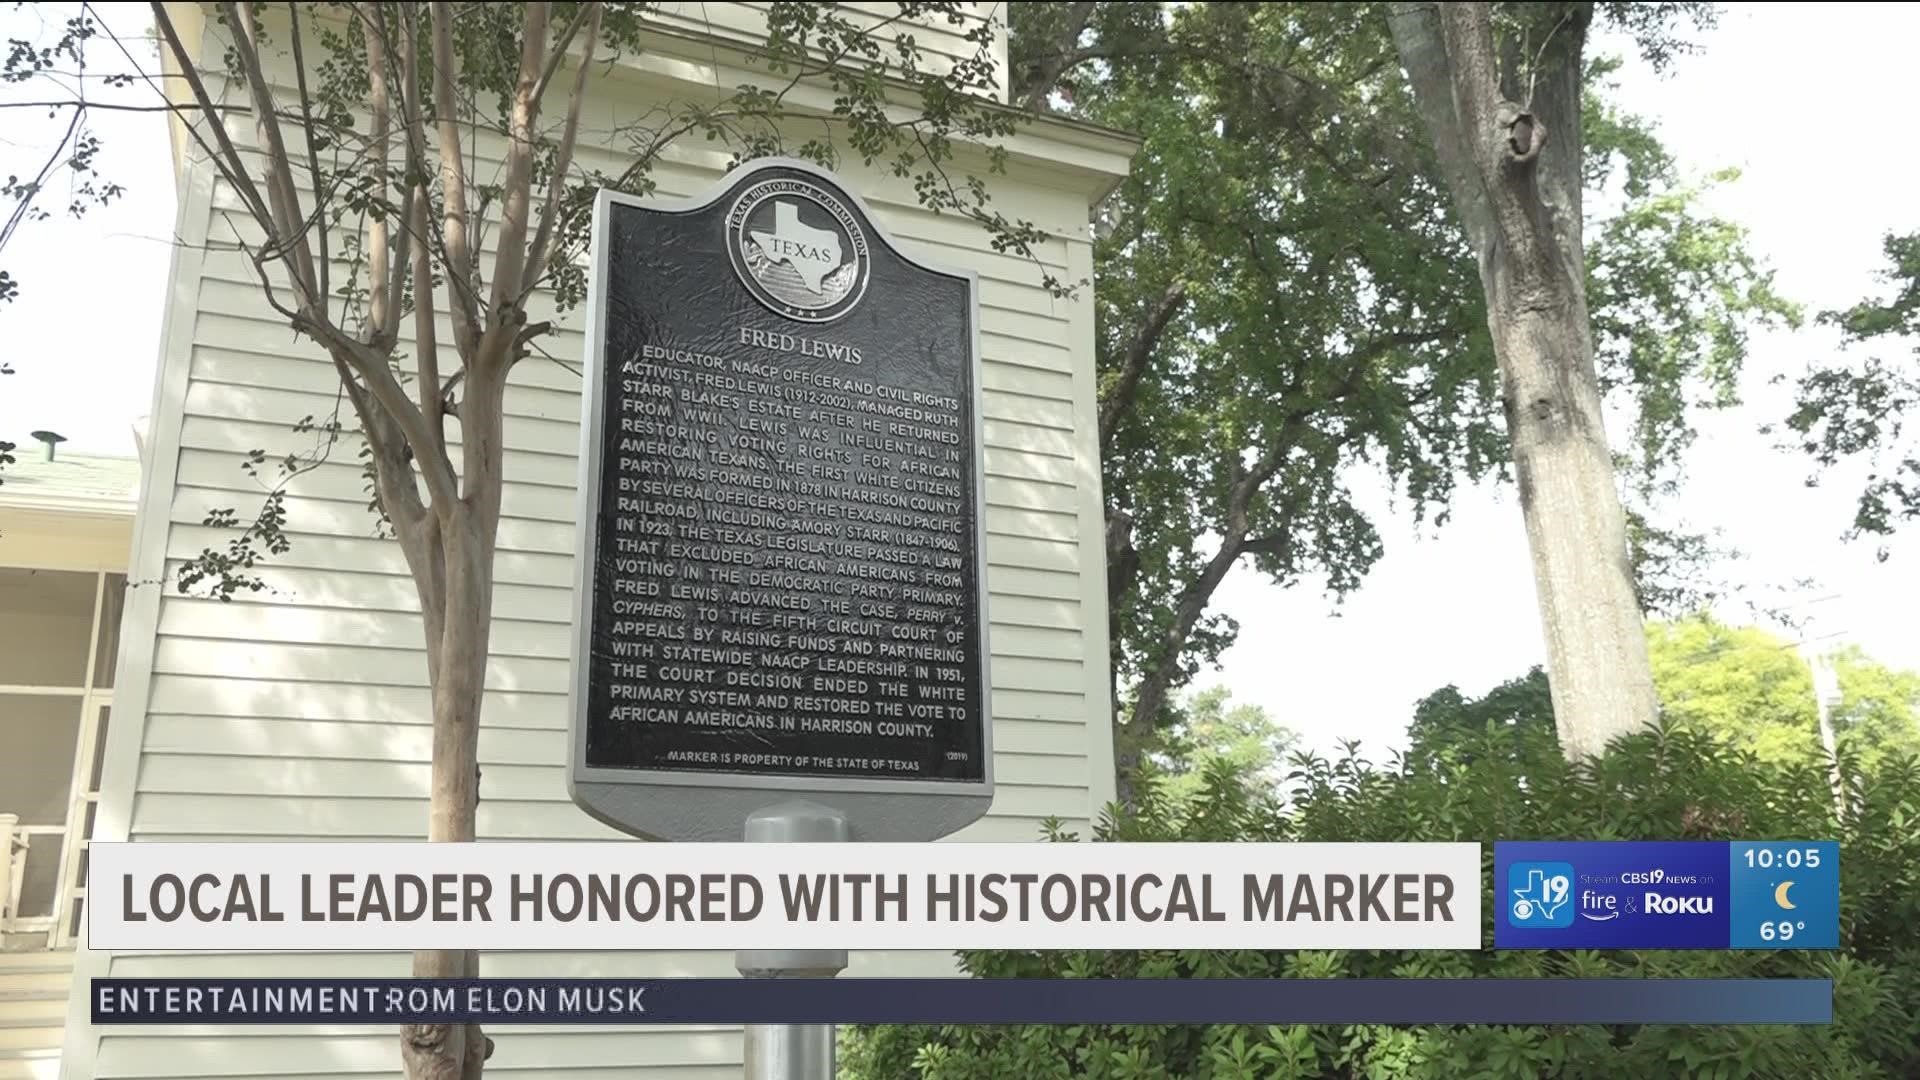 A new historical marker in Marshall, Texas celebrates a local civil rights leader and his legacy of fighting for the African American community.